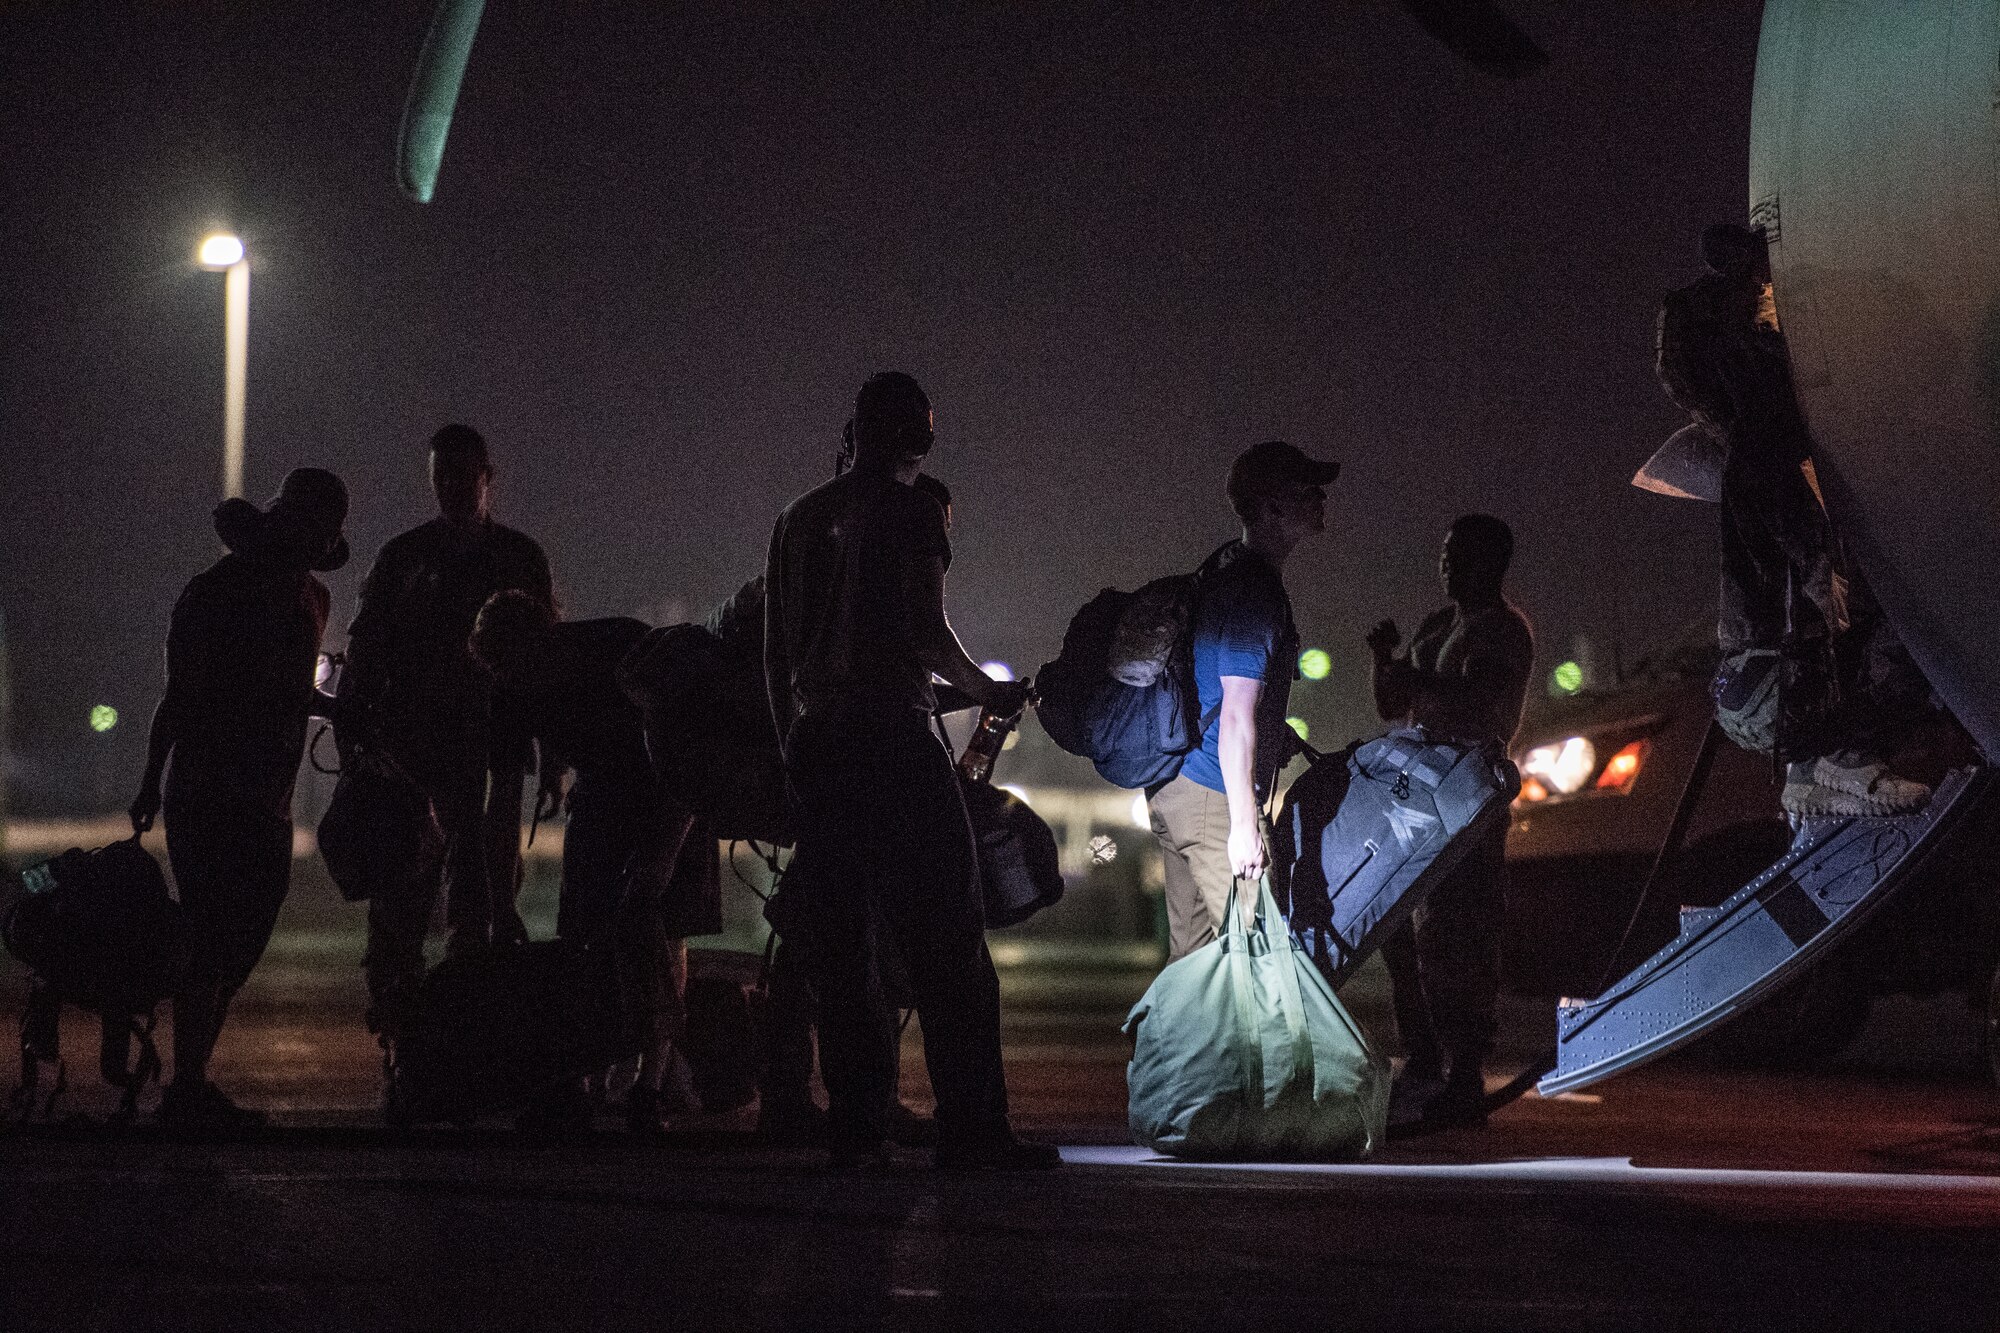 U.S. Air Force Airmen assigned to the 75th Expeditionary Airlift Squadron board a C-130J Super Hercules at Camp Lemonnier, Djibouti, June 5, 2019. The 75th EAS provides support in medical evacuations, disaster relief, humanitarian and airdrop operations. (U.S. Air Force photo by Staff Sgt. Devin Boyer)